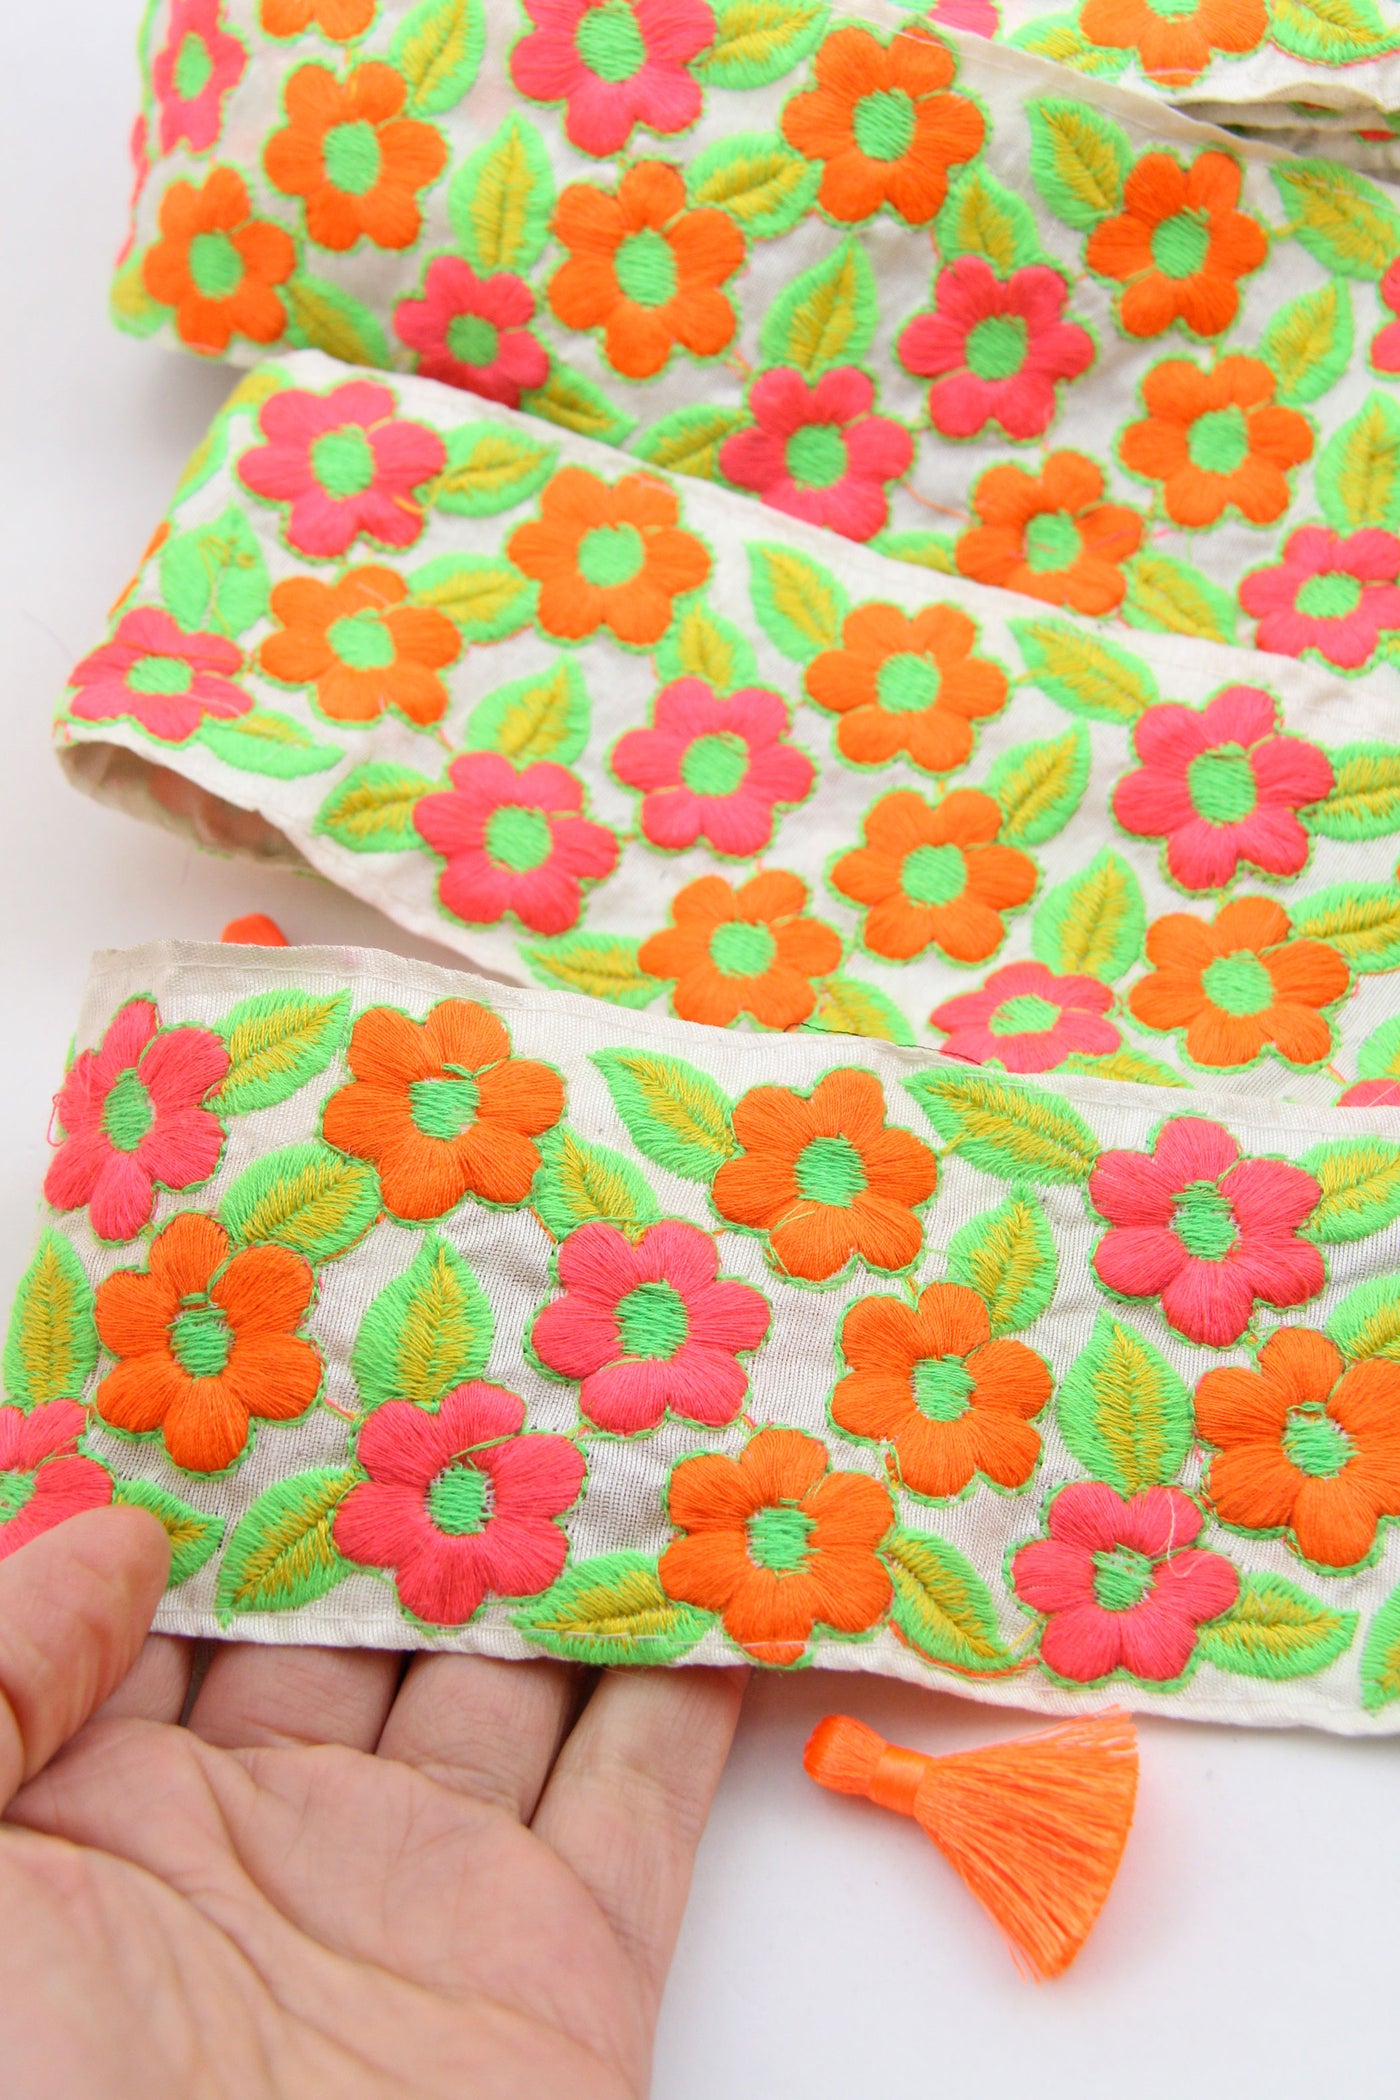 Neon Blossom: Bright Floral Embroidered Silk Trim from India, 2 7/8" wide